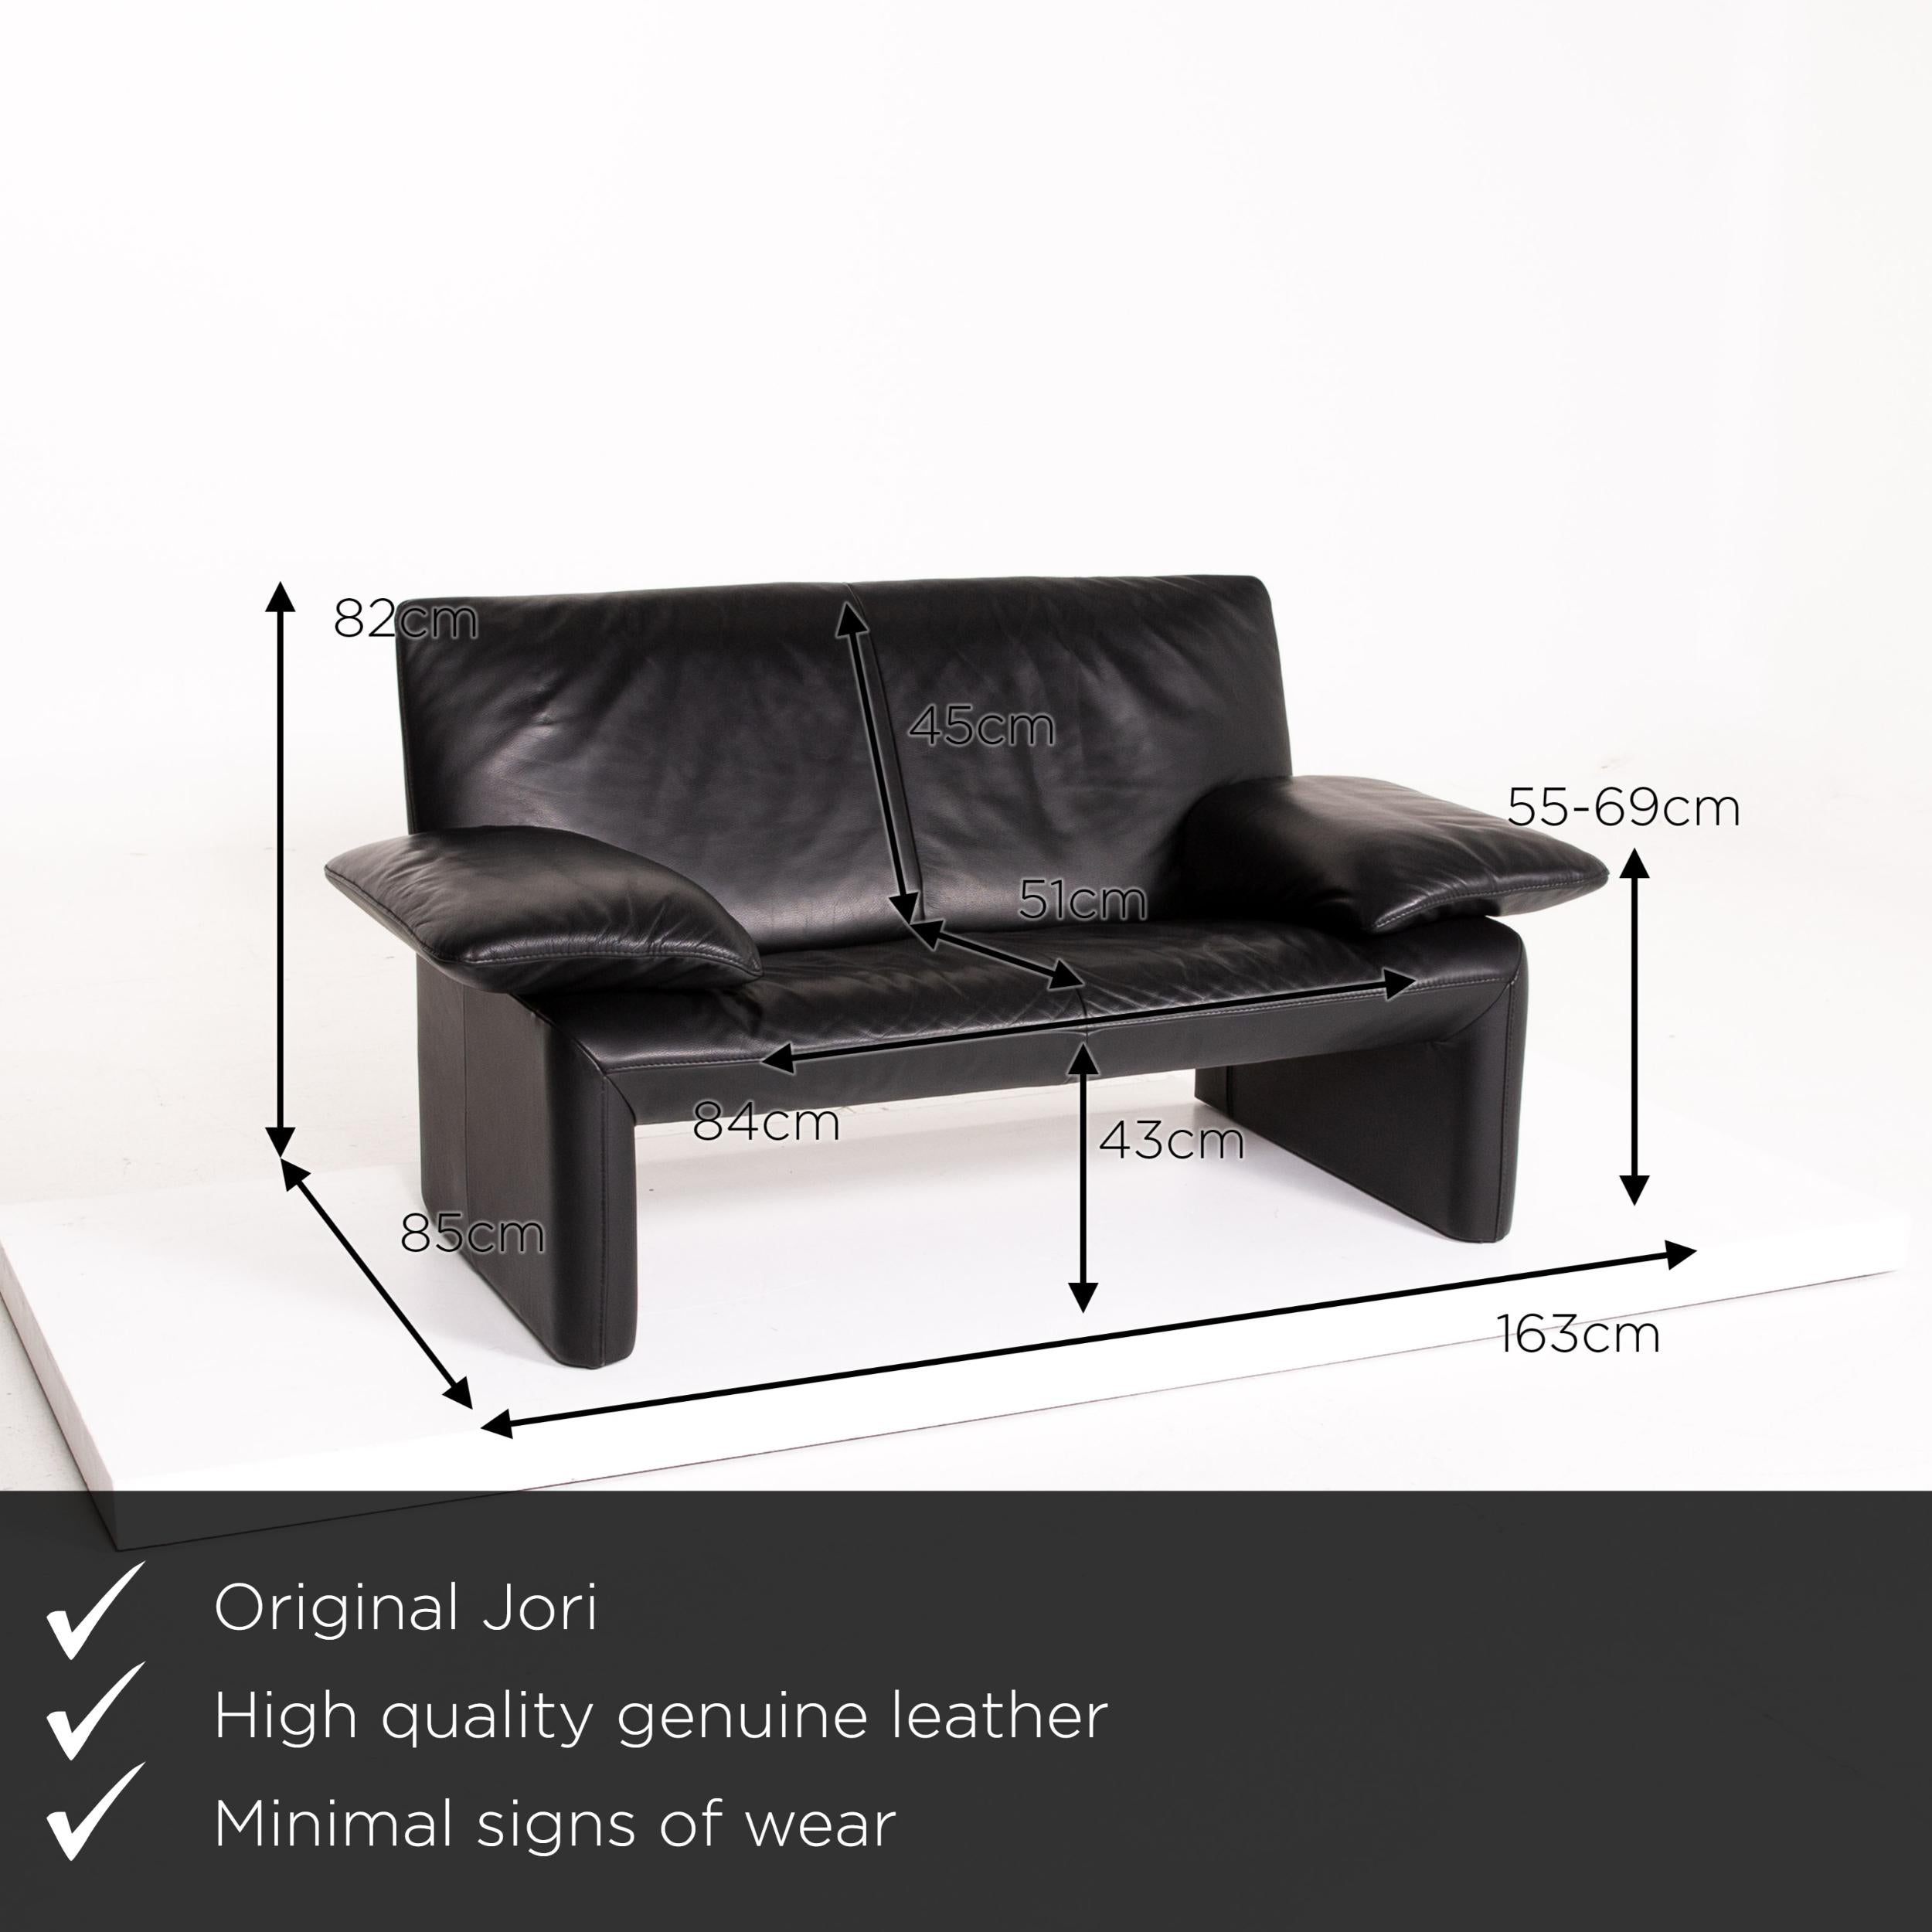 We present to you a JORI leather sofa black two-seat couch.
    
 

 Product measurements in centimeters:
 

Depth 85
Width 163
Height 82
Seat height 43
Rest height 55
Seat depth 51
Seat width 84
Back height 45.